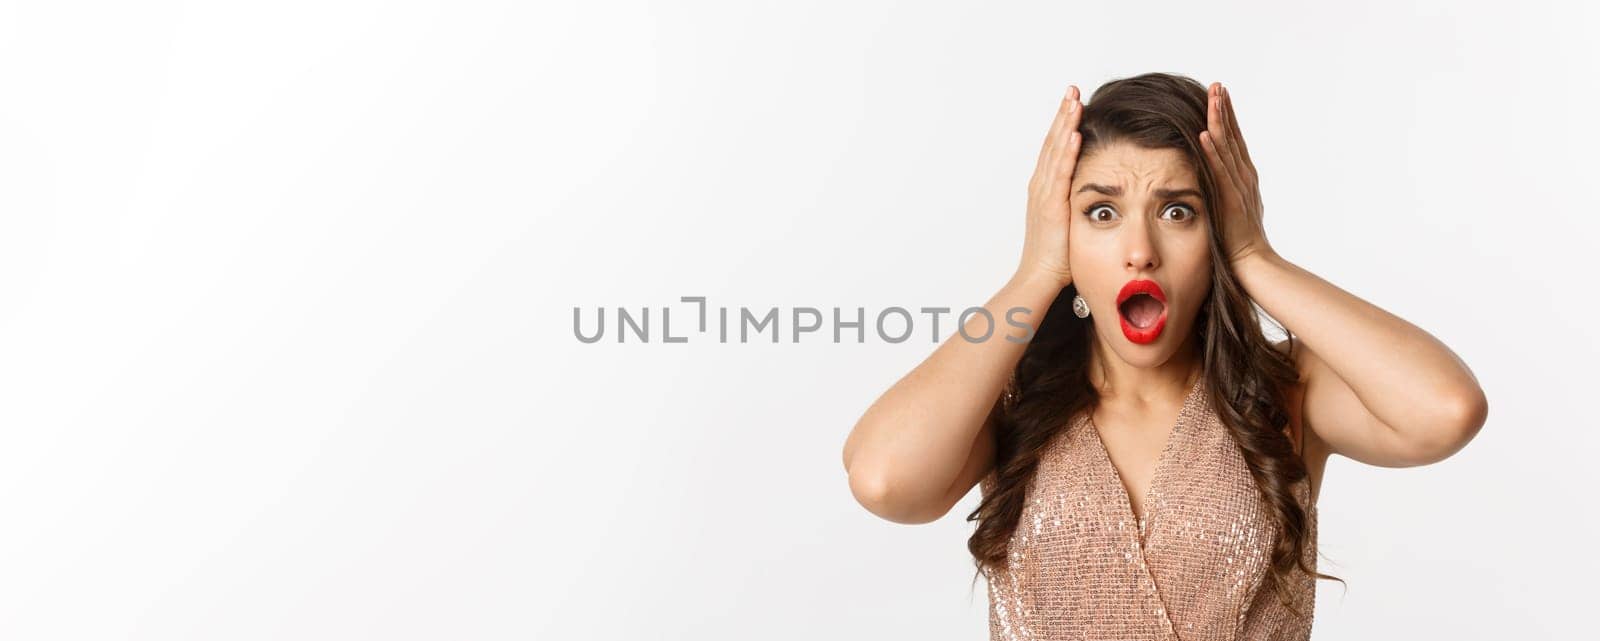 Concept of New Year celebration and winter holidays. Close-up of woman in luxury dress looking shocked and worried, standing over white background.